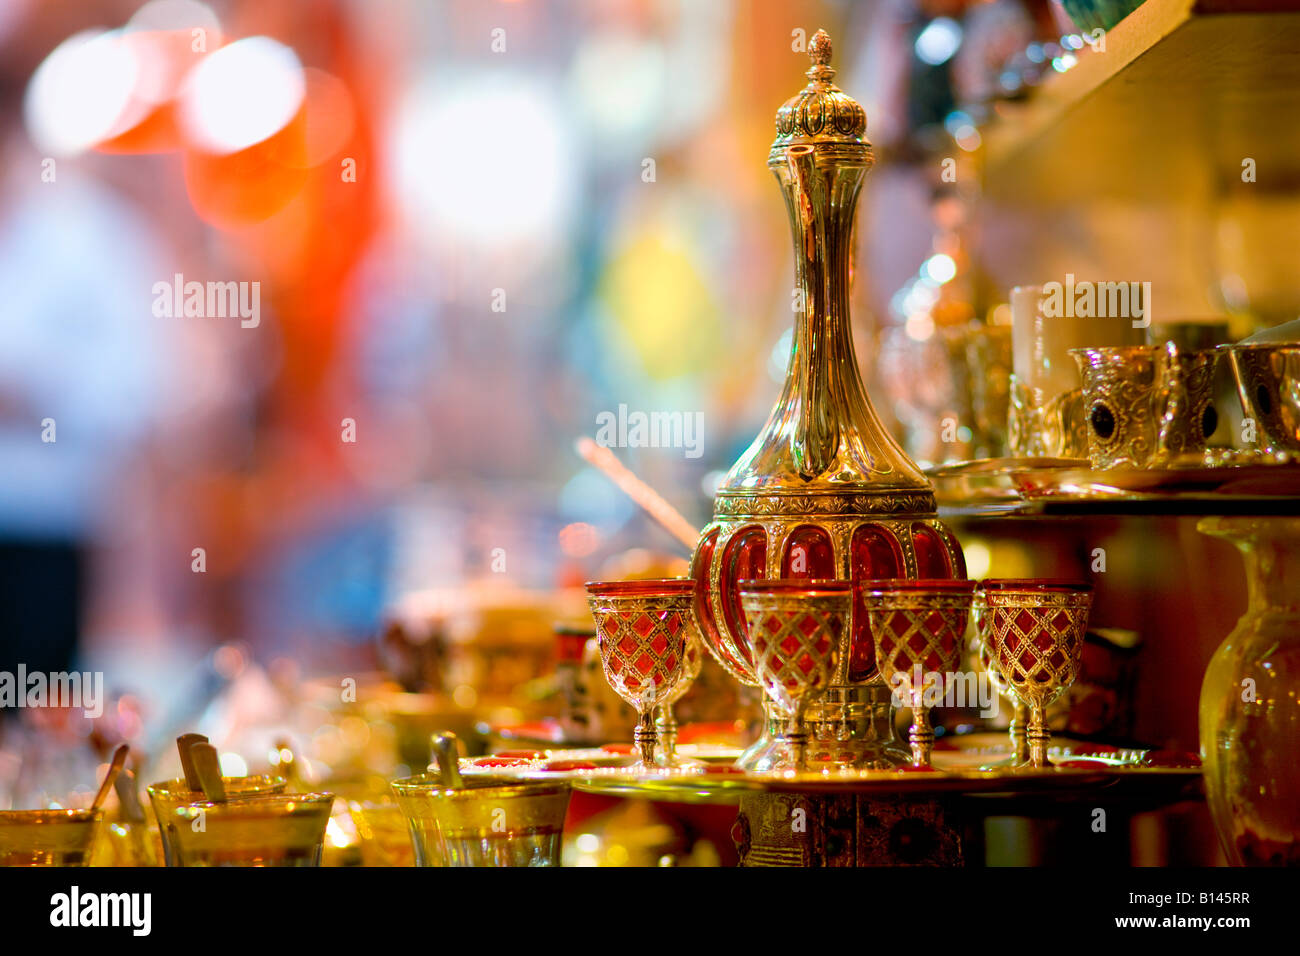 Turkish traditional tea set in The grand bazar in Istanbul Stock Photo